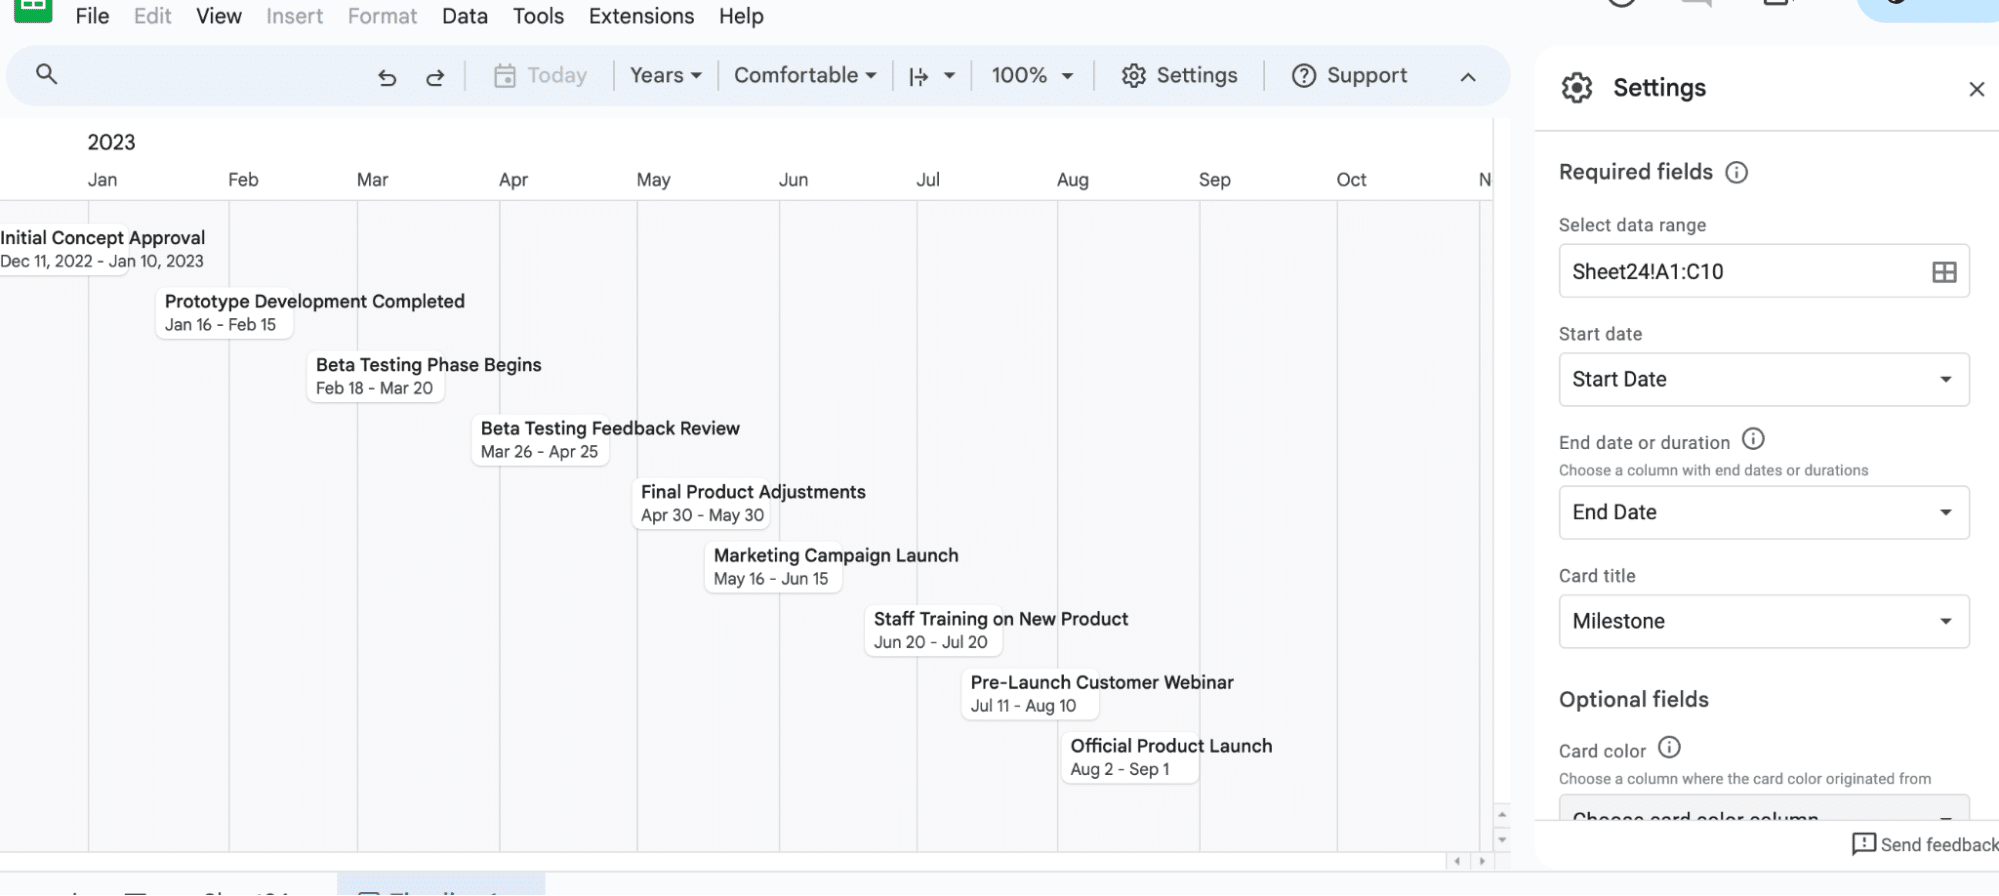 Automatically create timeline your timeline chart based on your data.